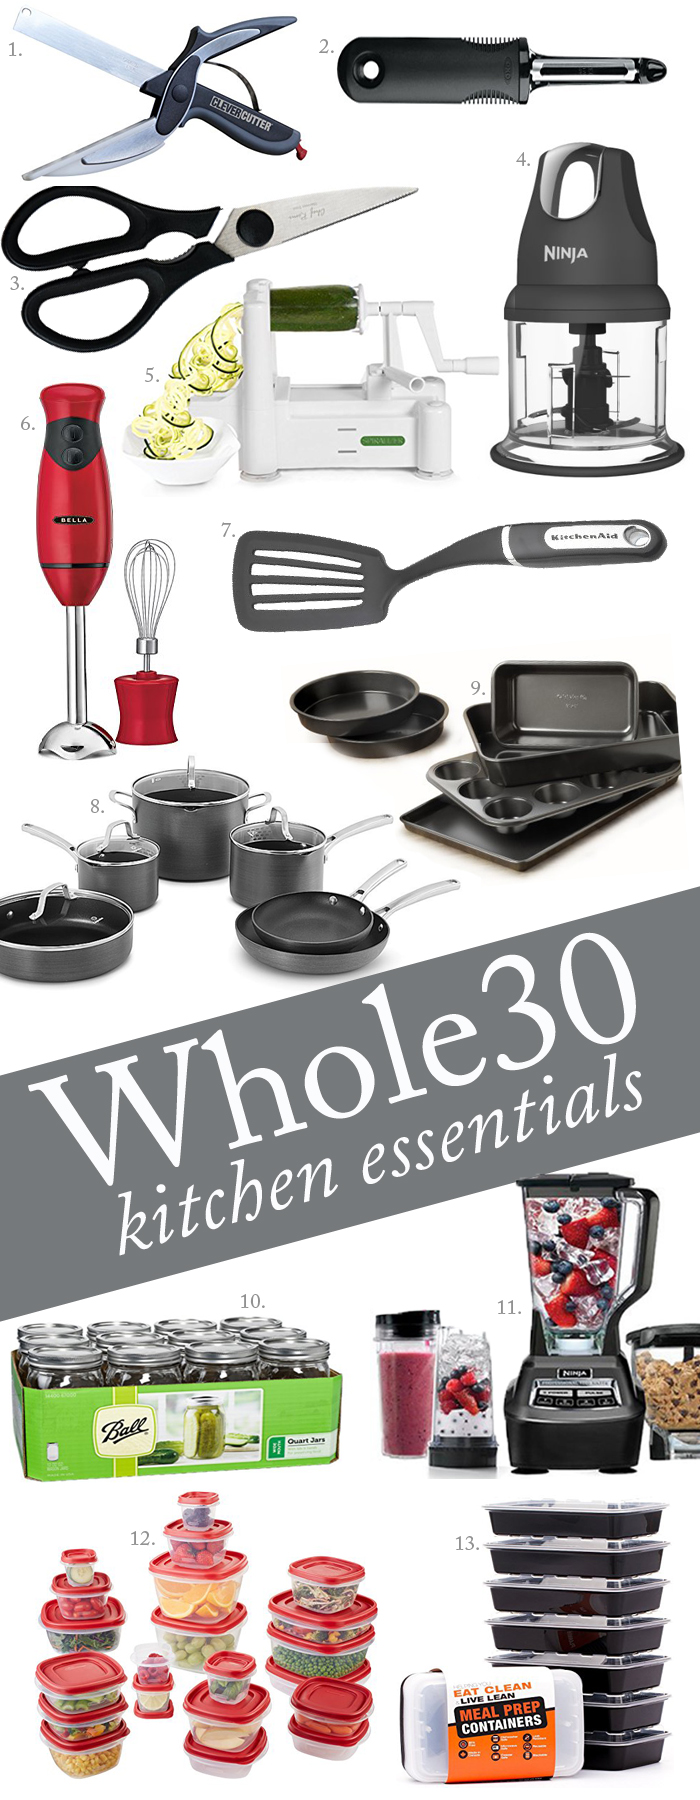 Whole30 Kitchen Essentials Shopping List - Whole30 Grocery List featured by popular Texas lifestyle blogger, Style Your Senses